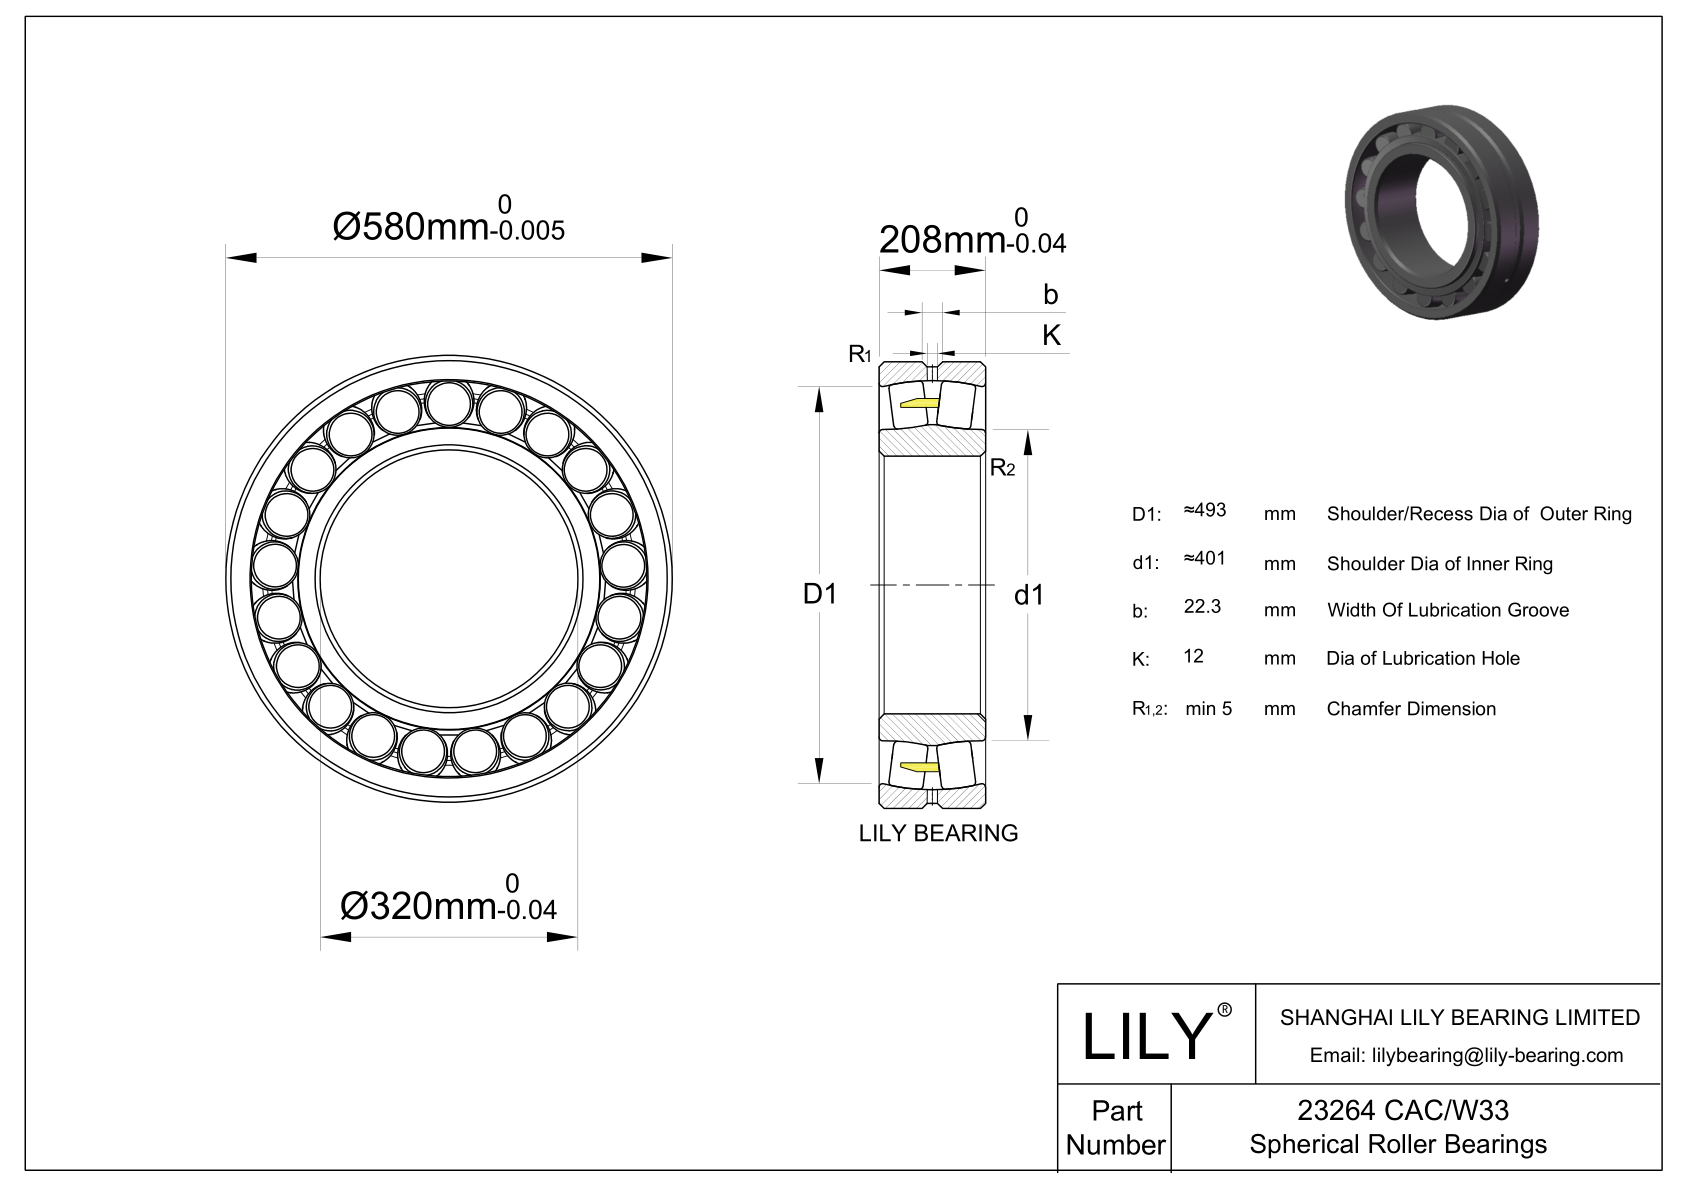 23264 CAC/W33 Double Row Spherical Roller Bearing cad drawing